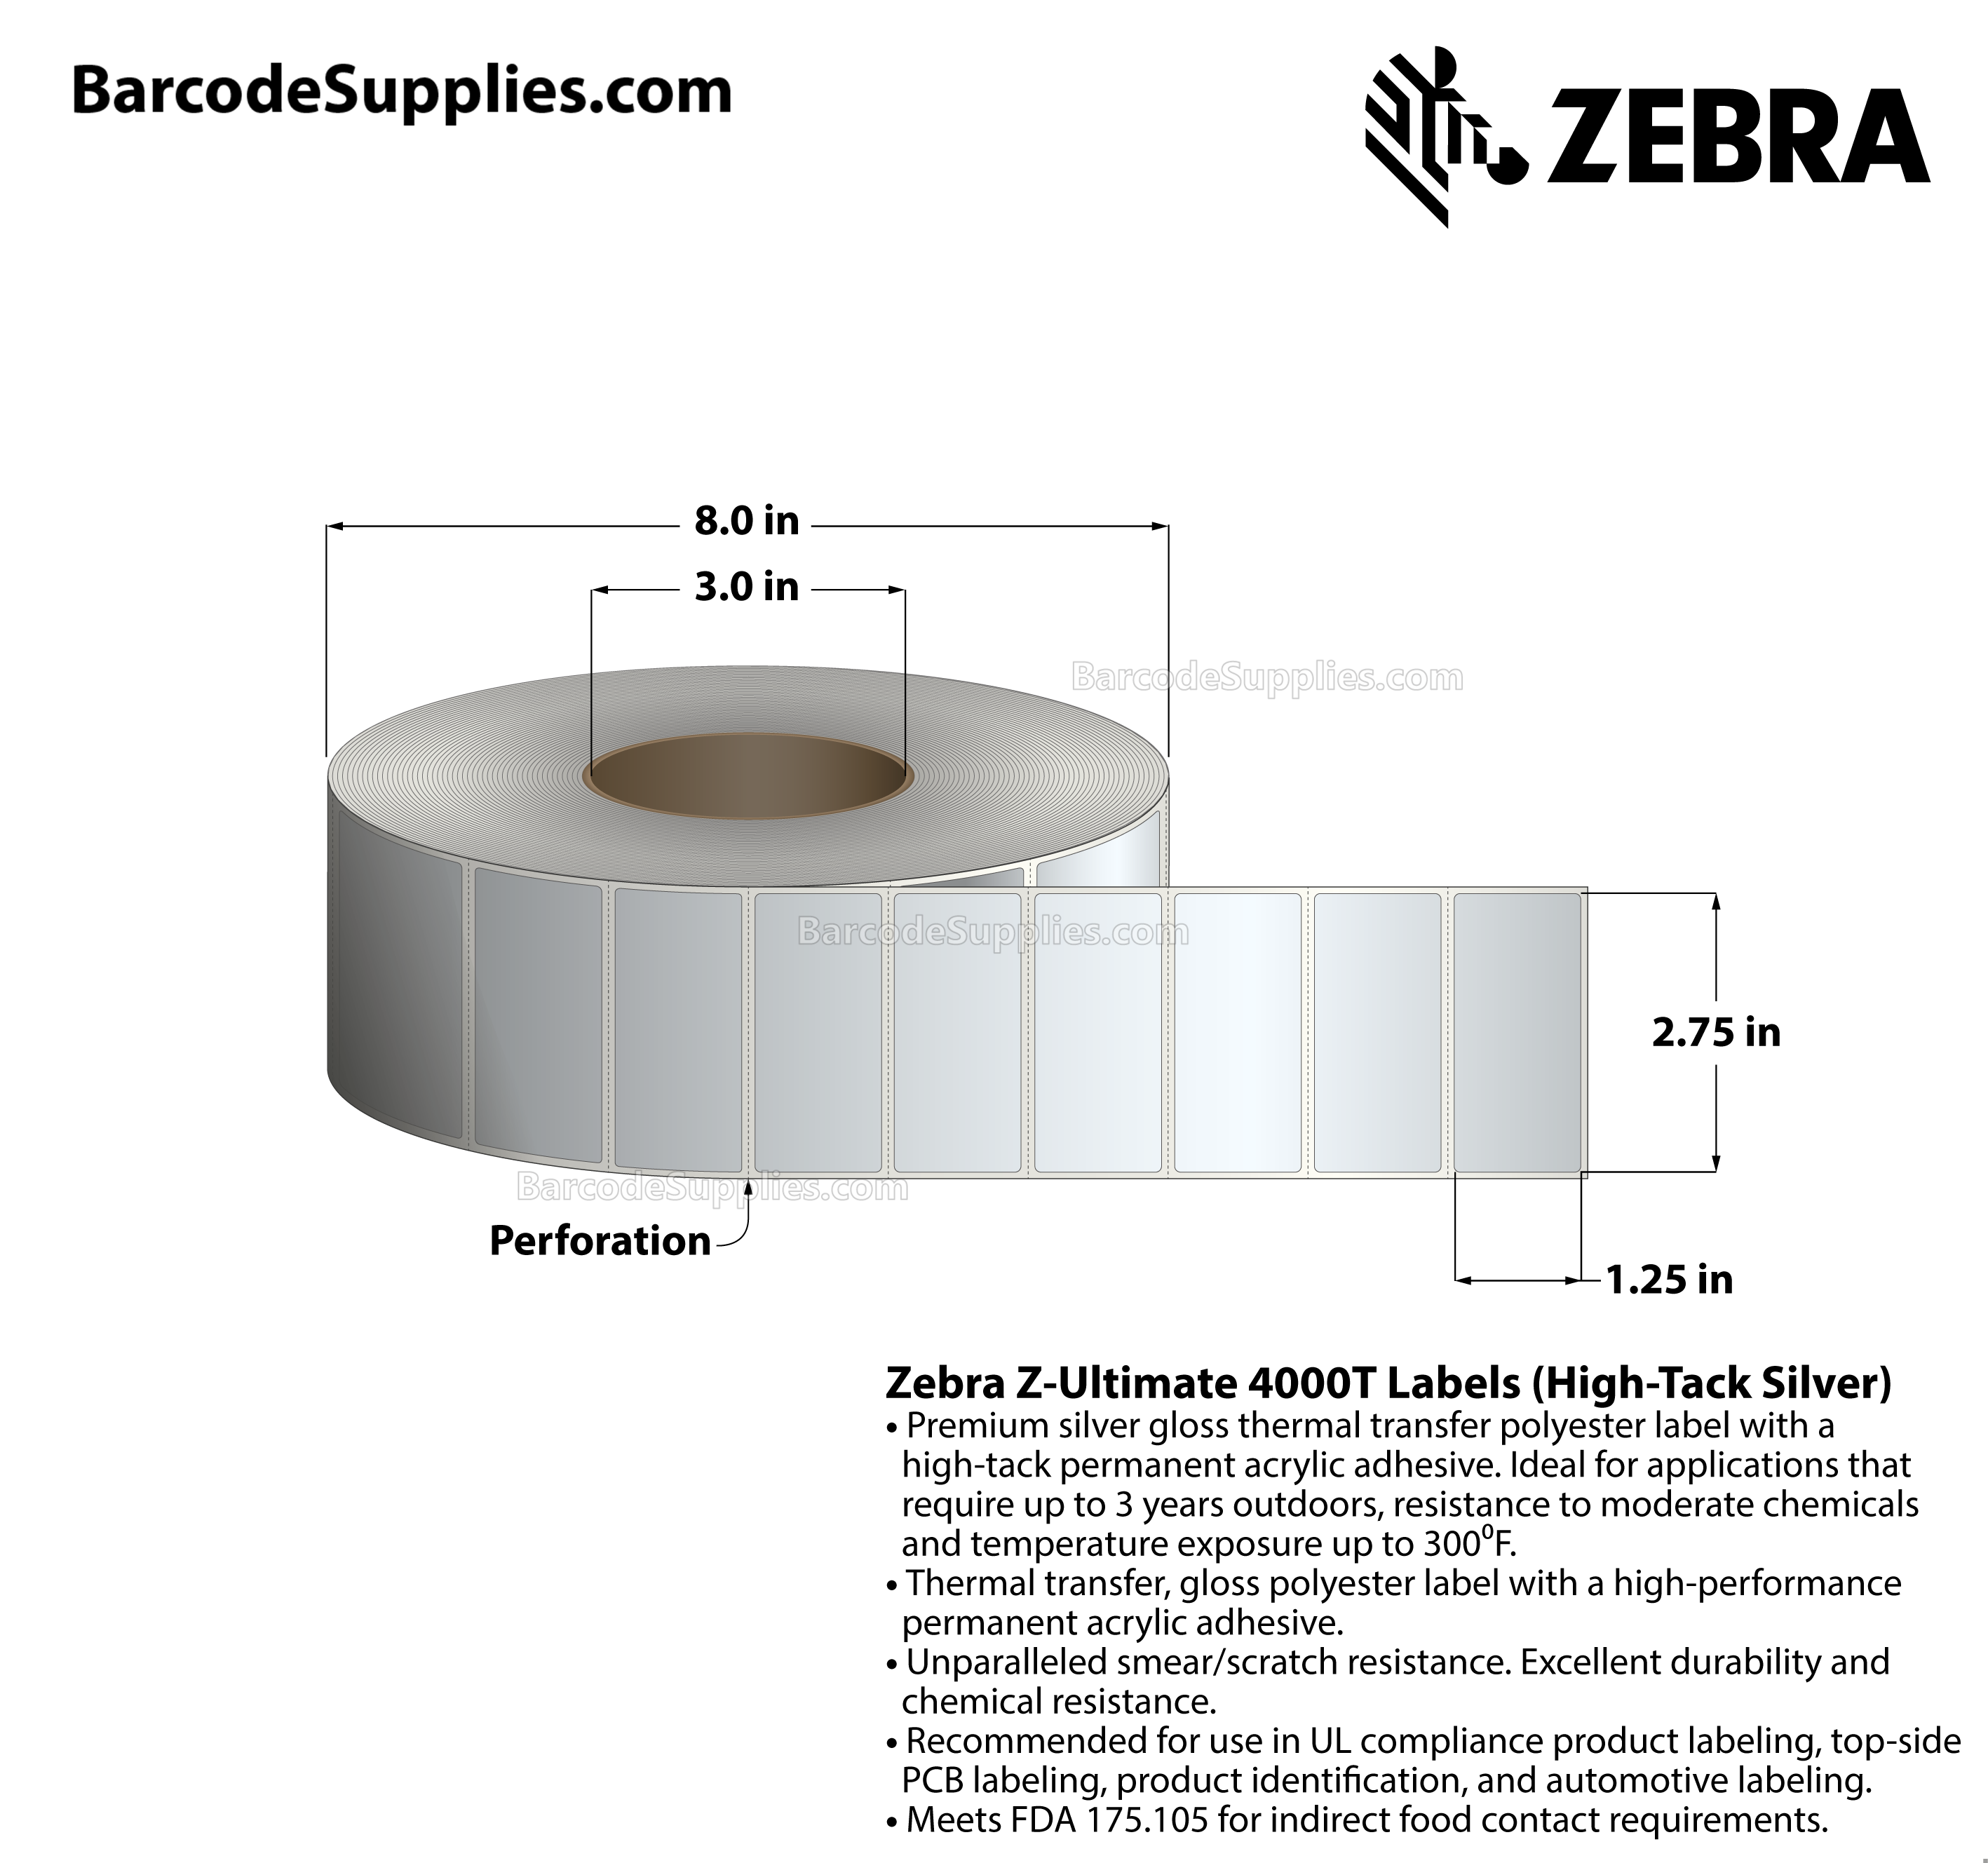 2.75 x 1.25 Thermal Transfer Silver Z-Ultimate 4000T High-Tack Silver Labels With High-tack Adhesive - Perforated - 3000 Labels Per Roll - Carton Of 1 Rolls - 3000 Labels Total - MPN: 10023354